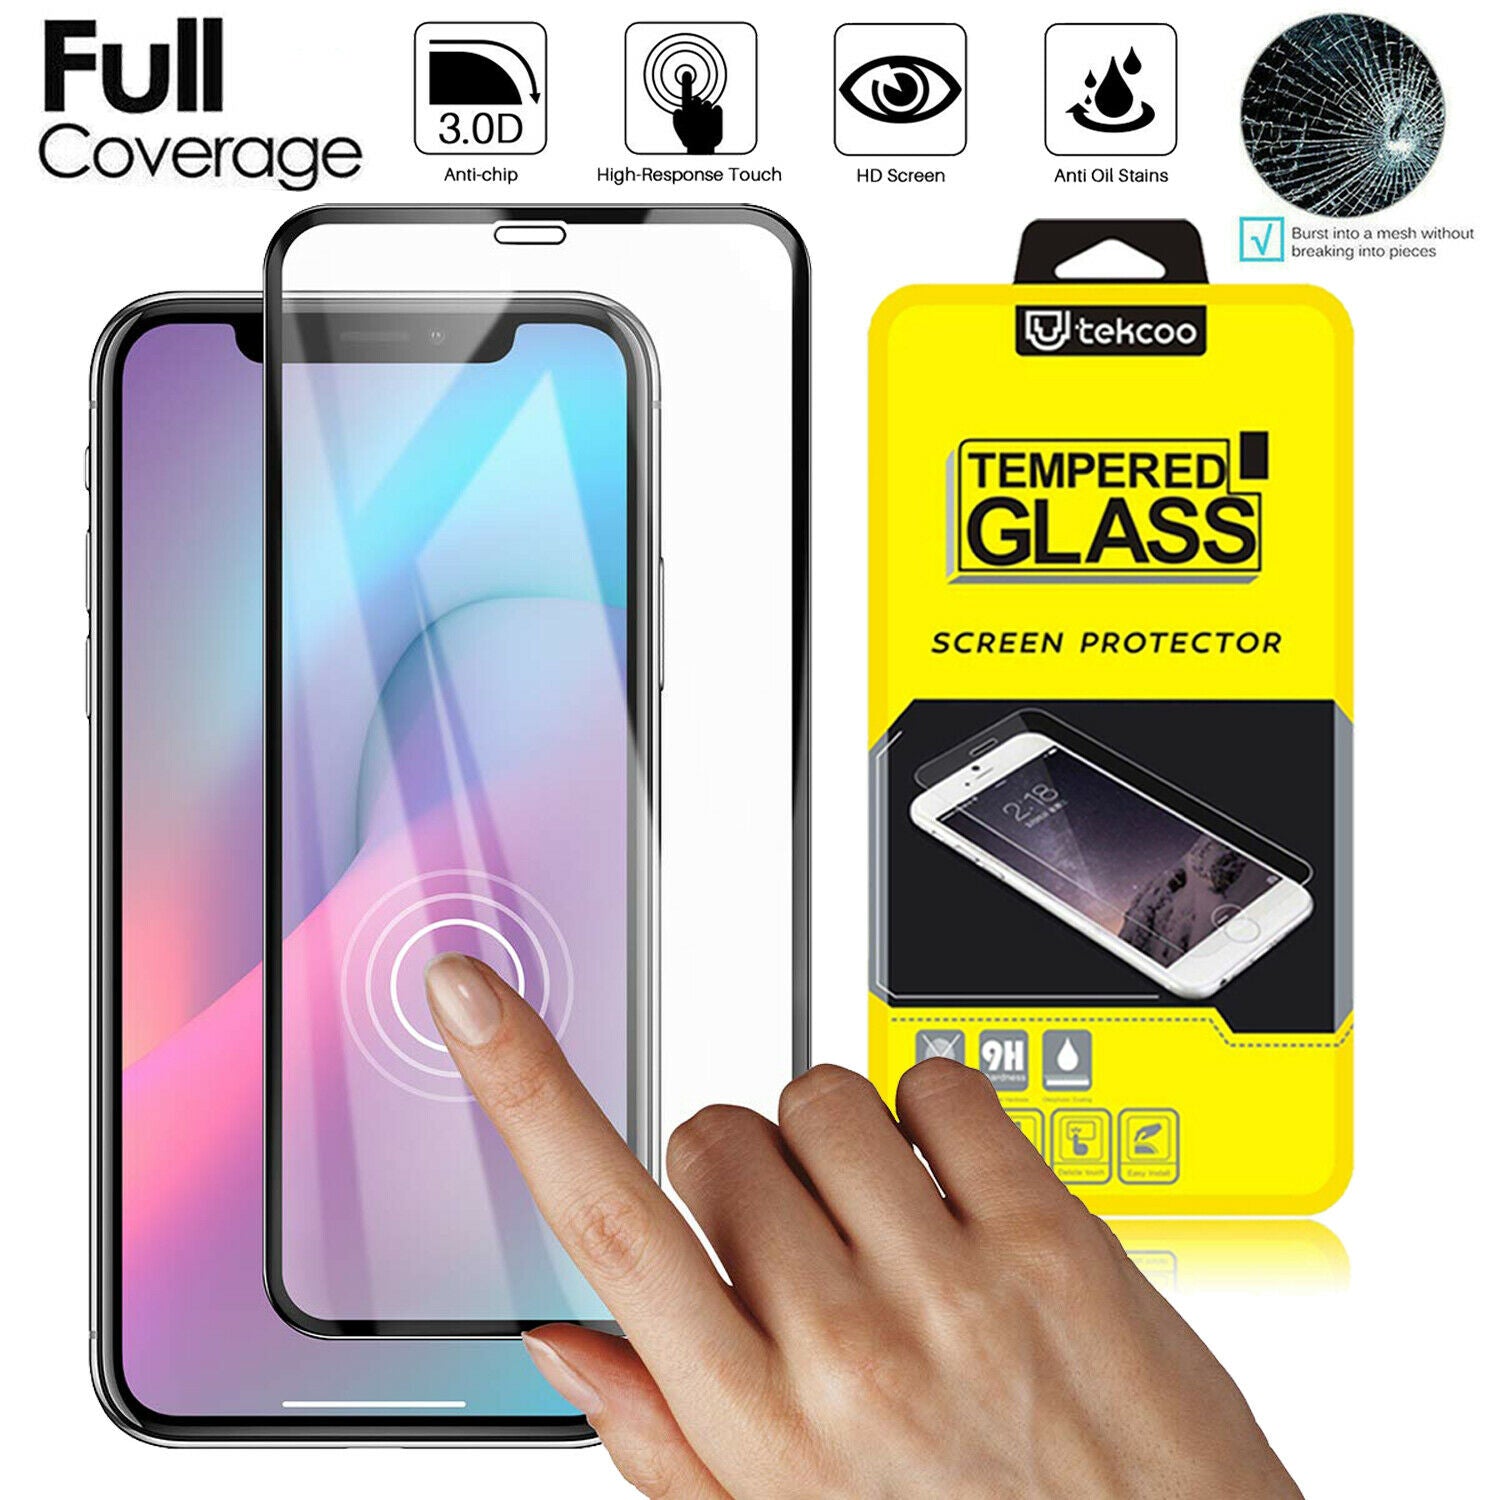 Shockproof Silicone Soft Cover with Screen Protector for iPhone